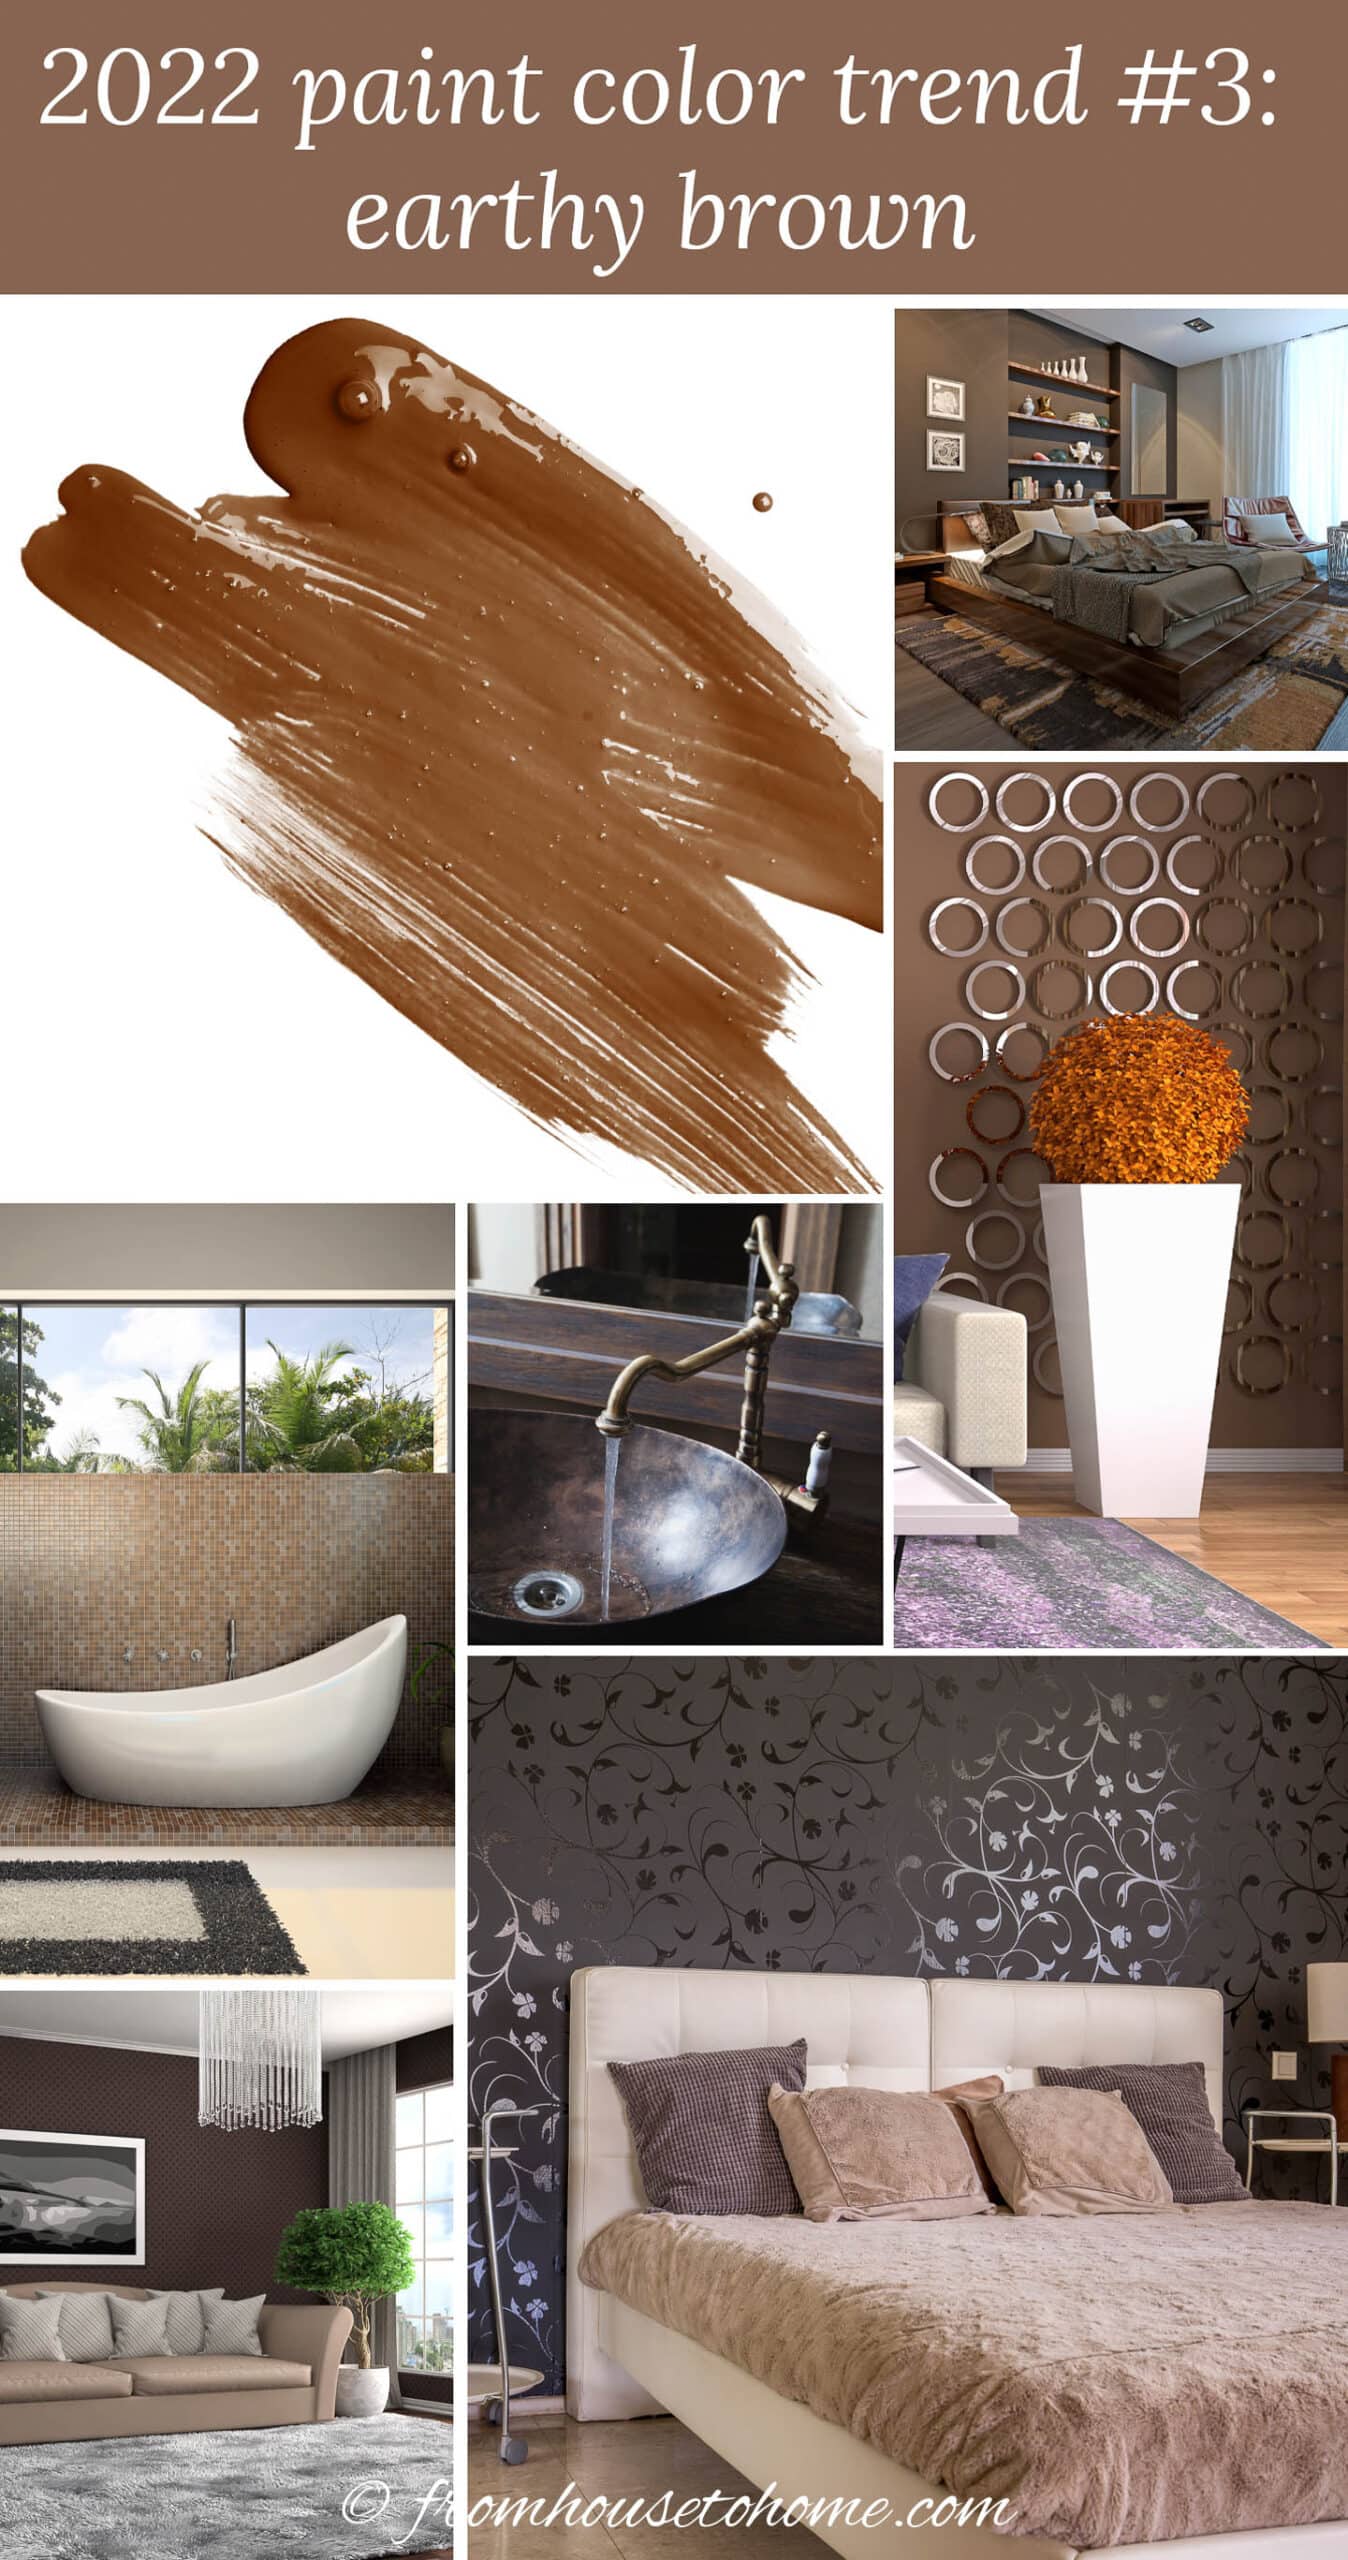 earthy brown paint colors, including a paint swatch, a bedroom with brown walls, a living room with brown walls, a bronze sink, a bathroom with brown tiles and a white tub, a bedroom with brown floral wallpaper and a living room with brown walls